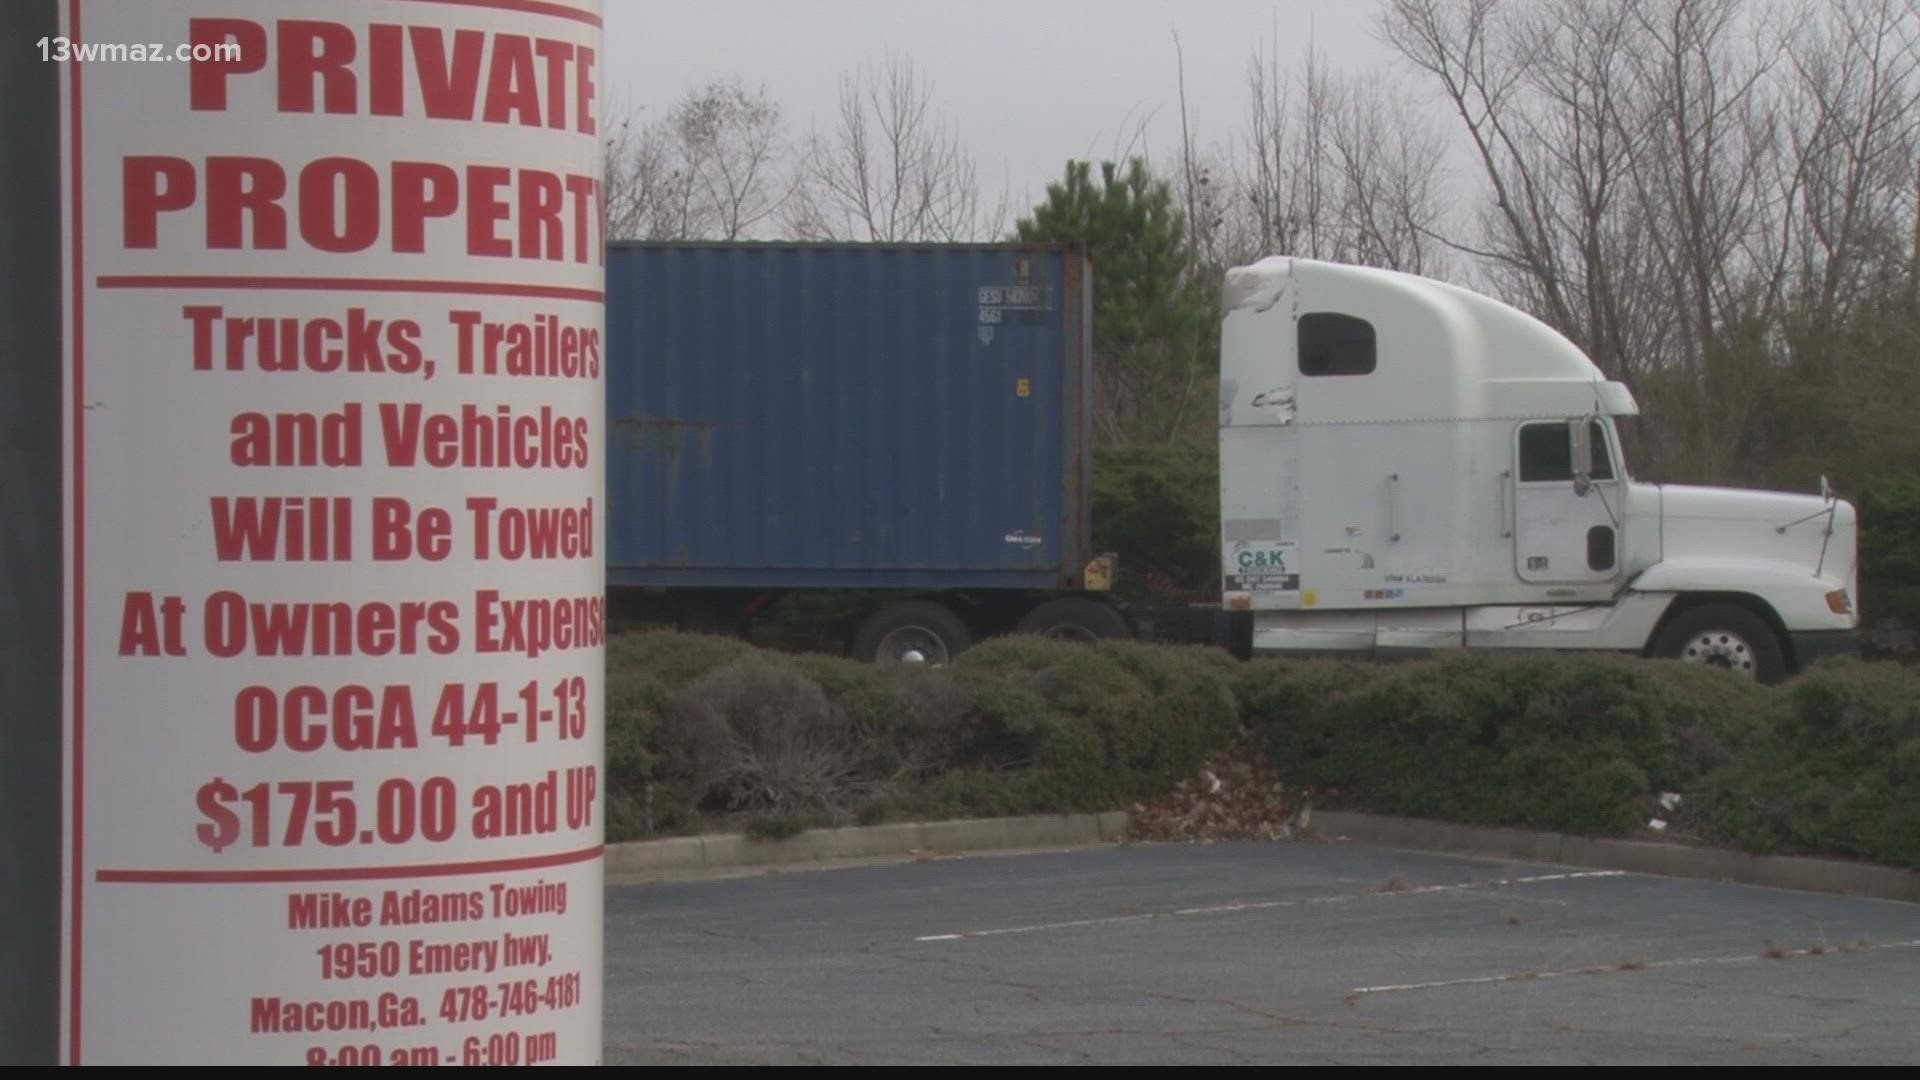 This new law is all part of the Comprehensive Land Development Resolution. The law includes 18-wheeler trailers left in public parking lots too.